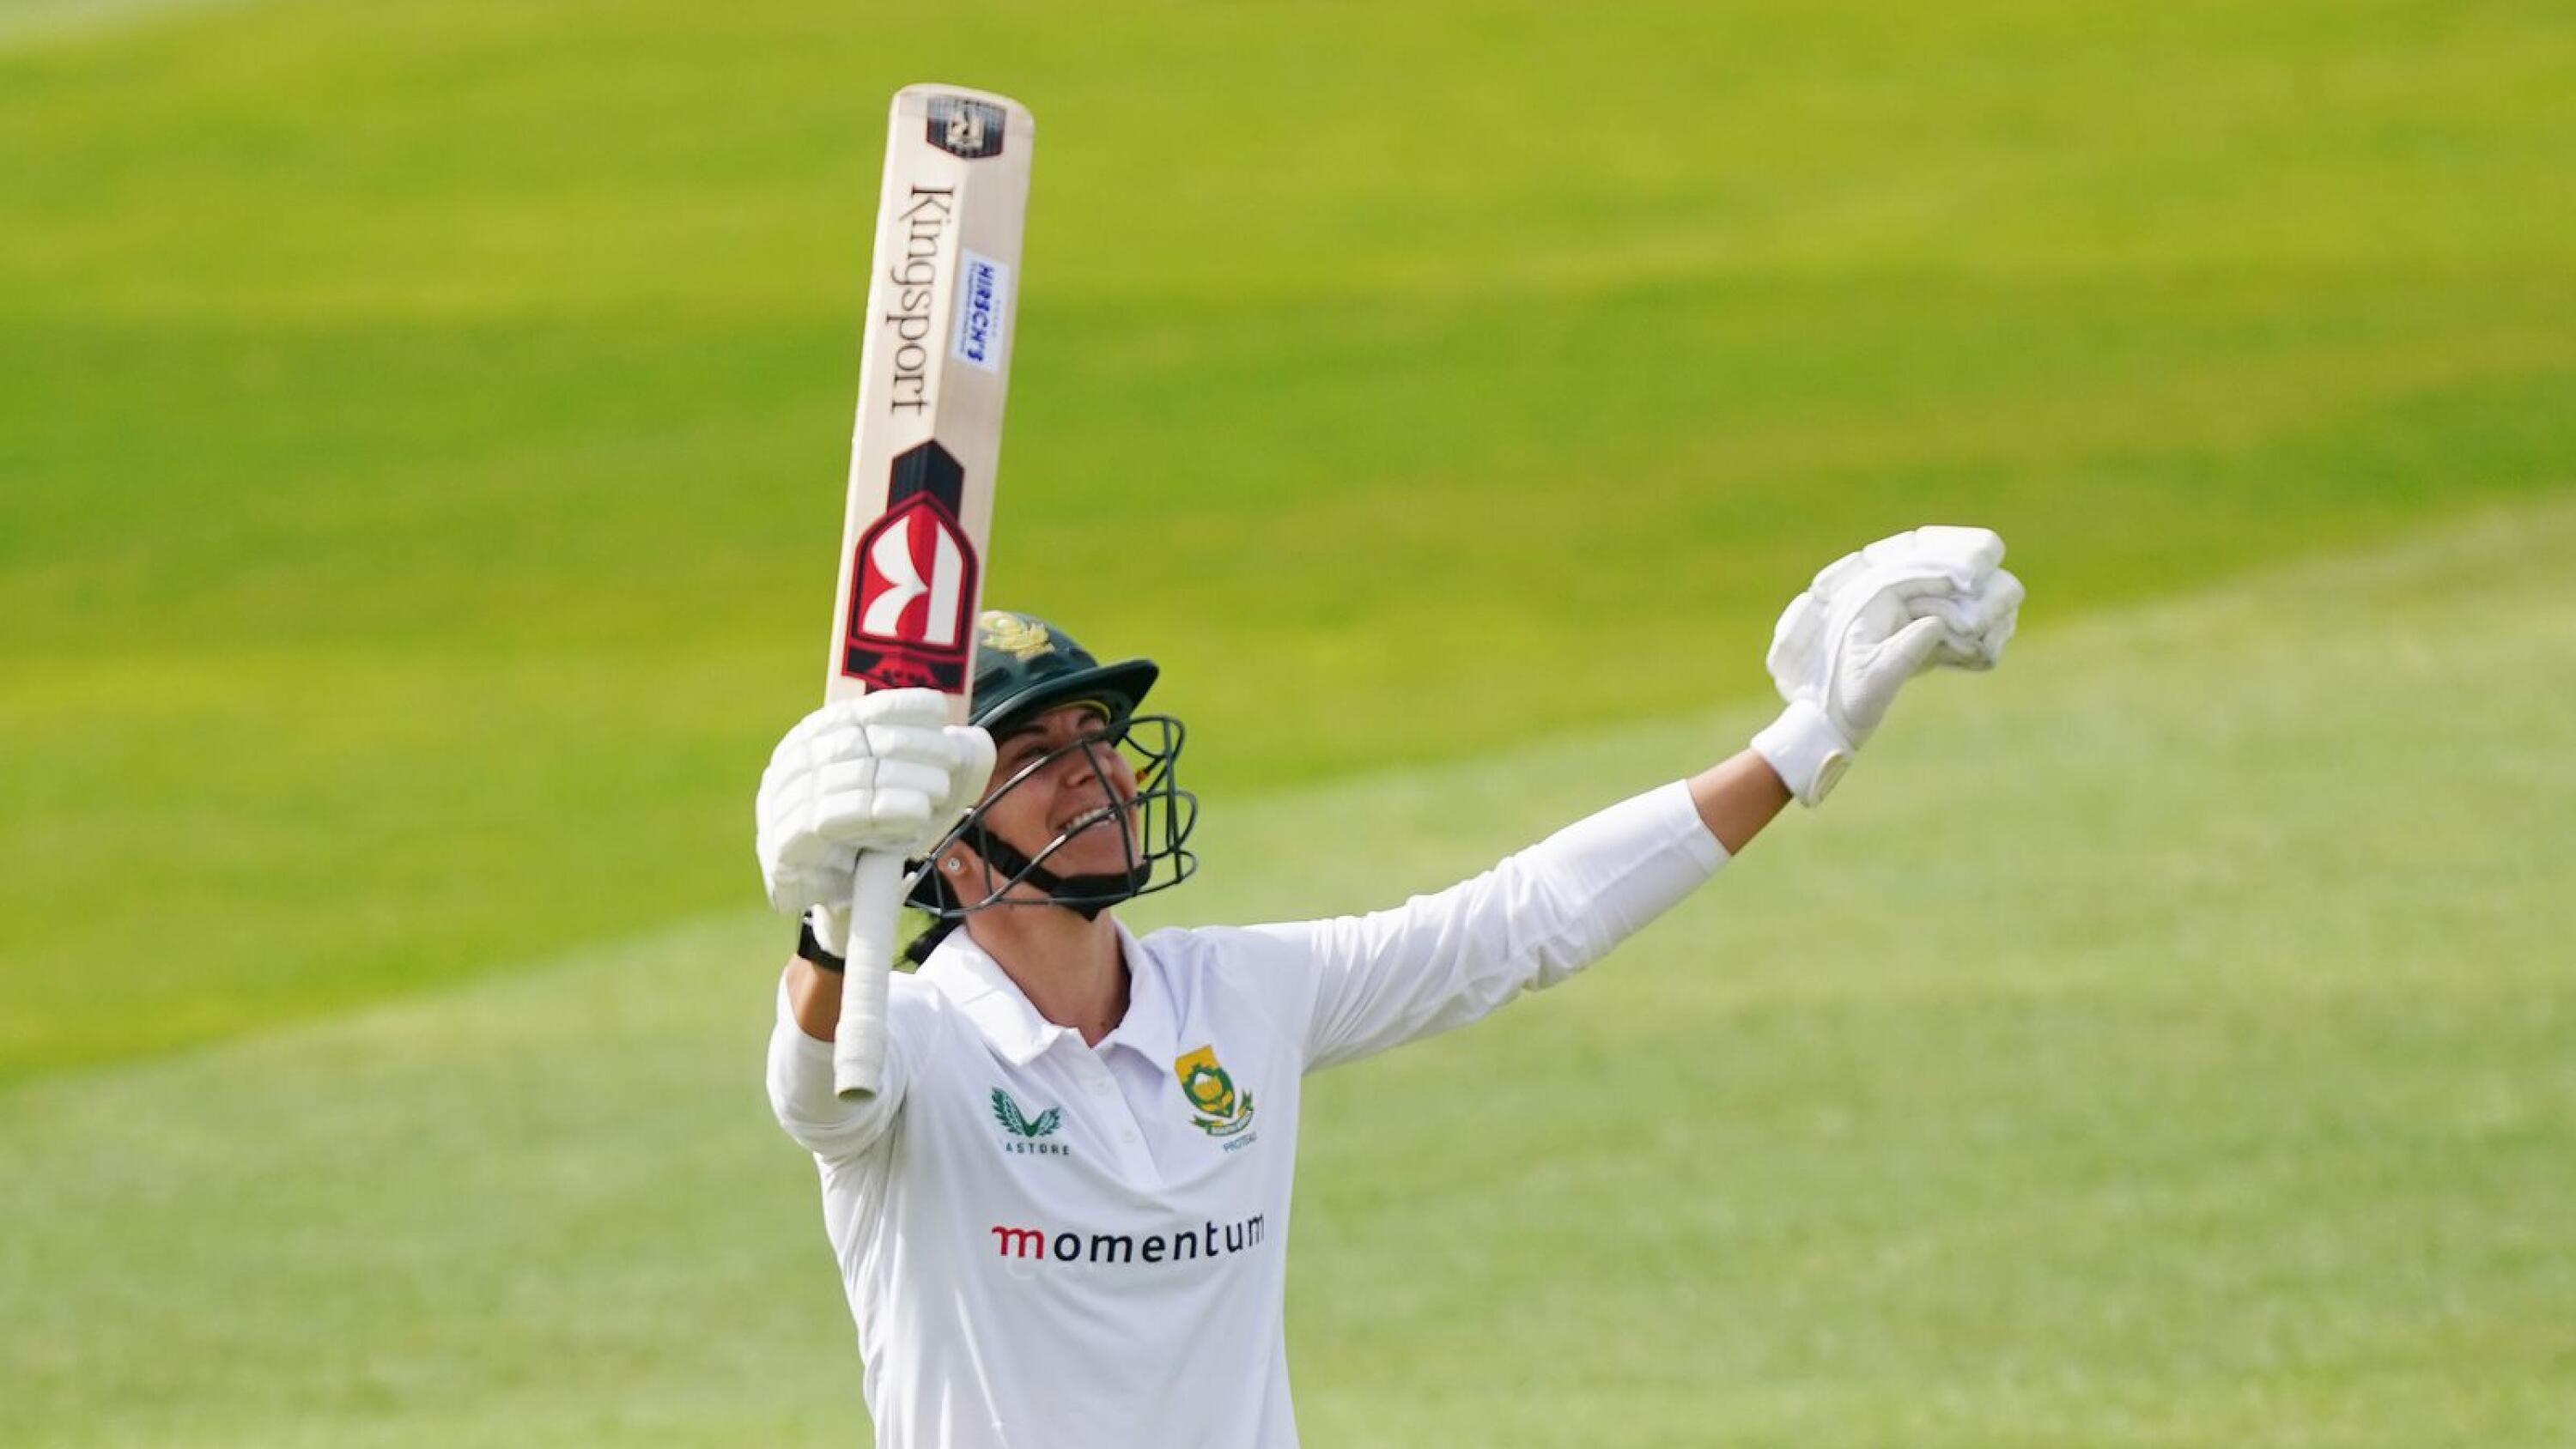 South Africa's Marizanne Kapp celebrates reaching her century during day one of the women's Test match at The Cooper Associates County Ground, Taunton